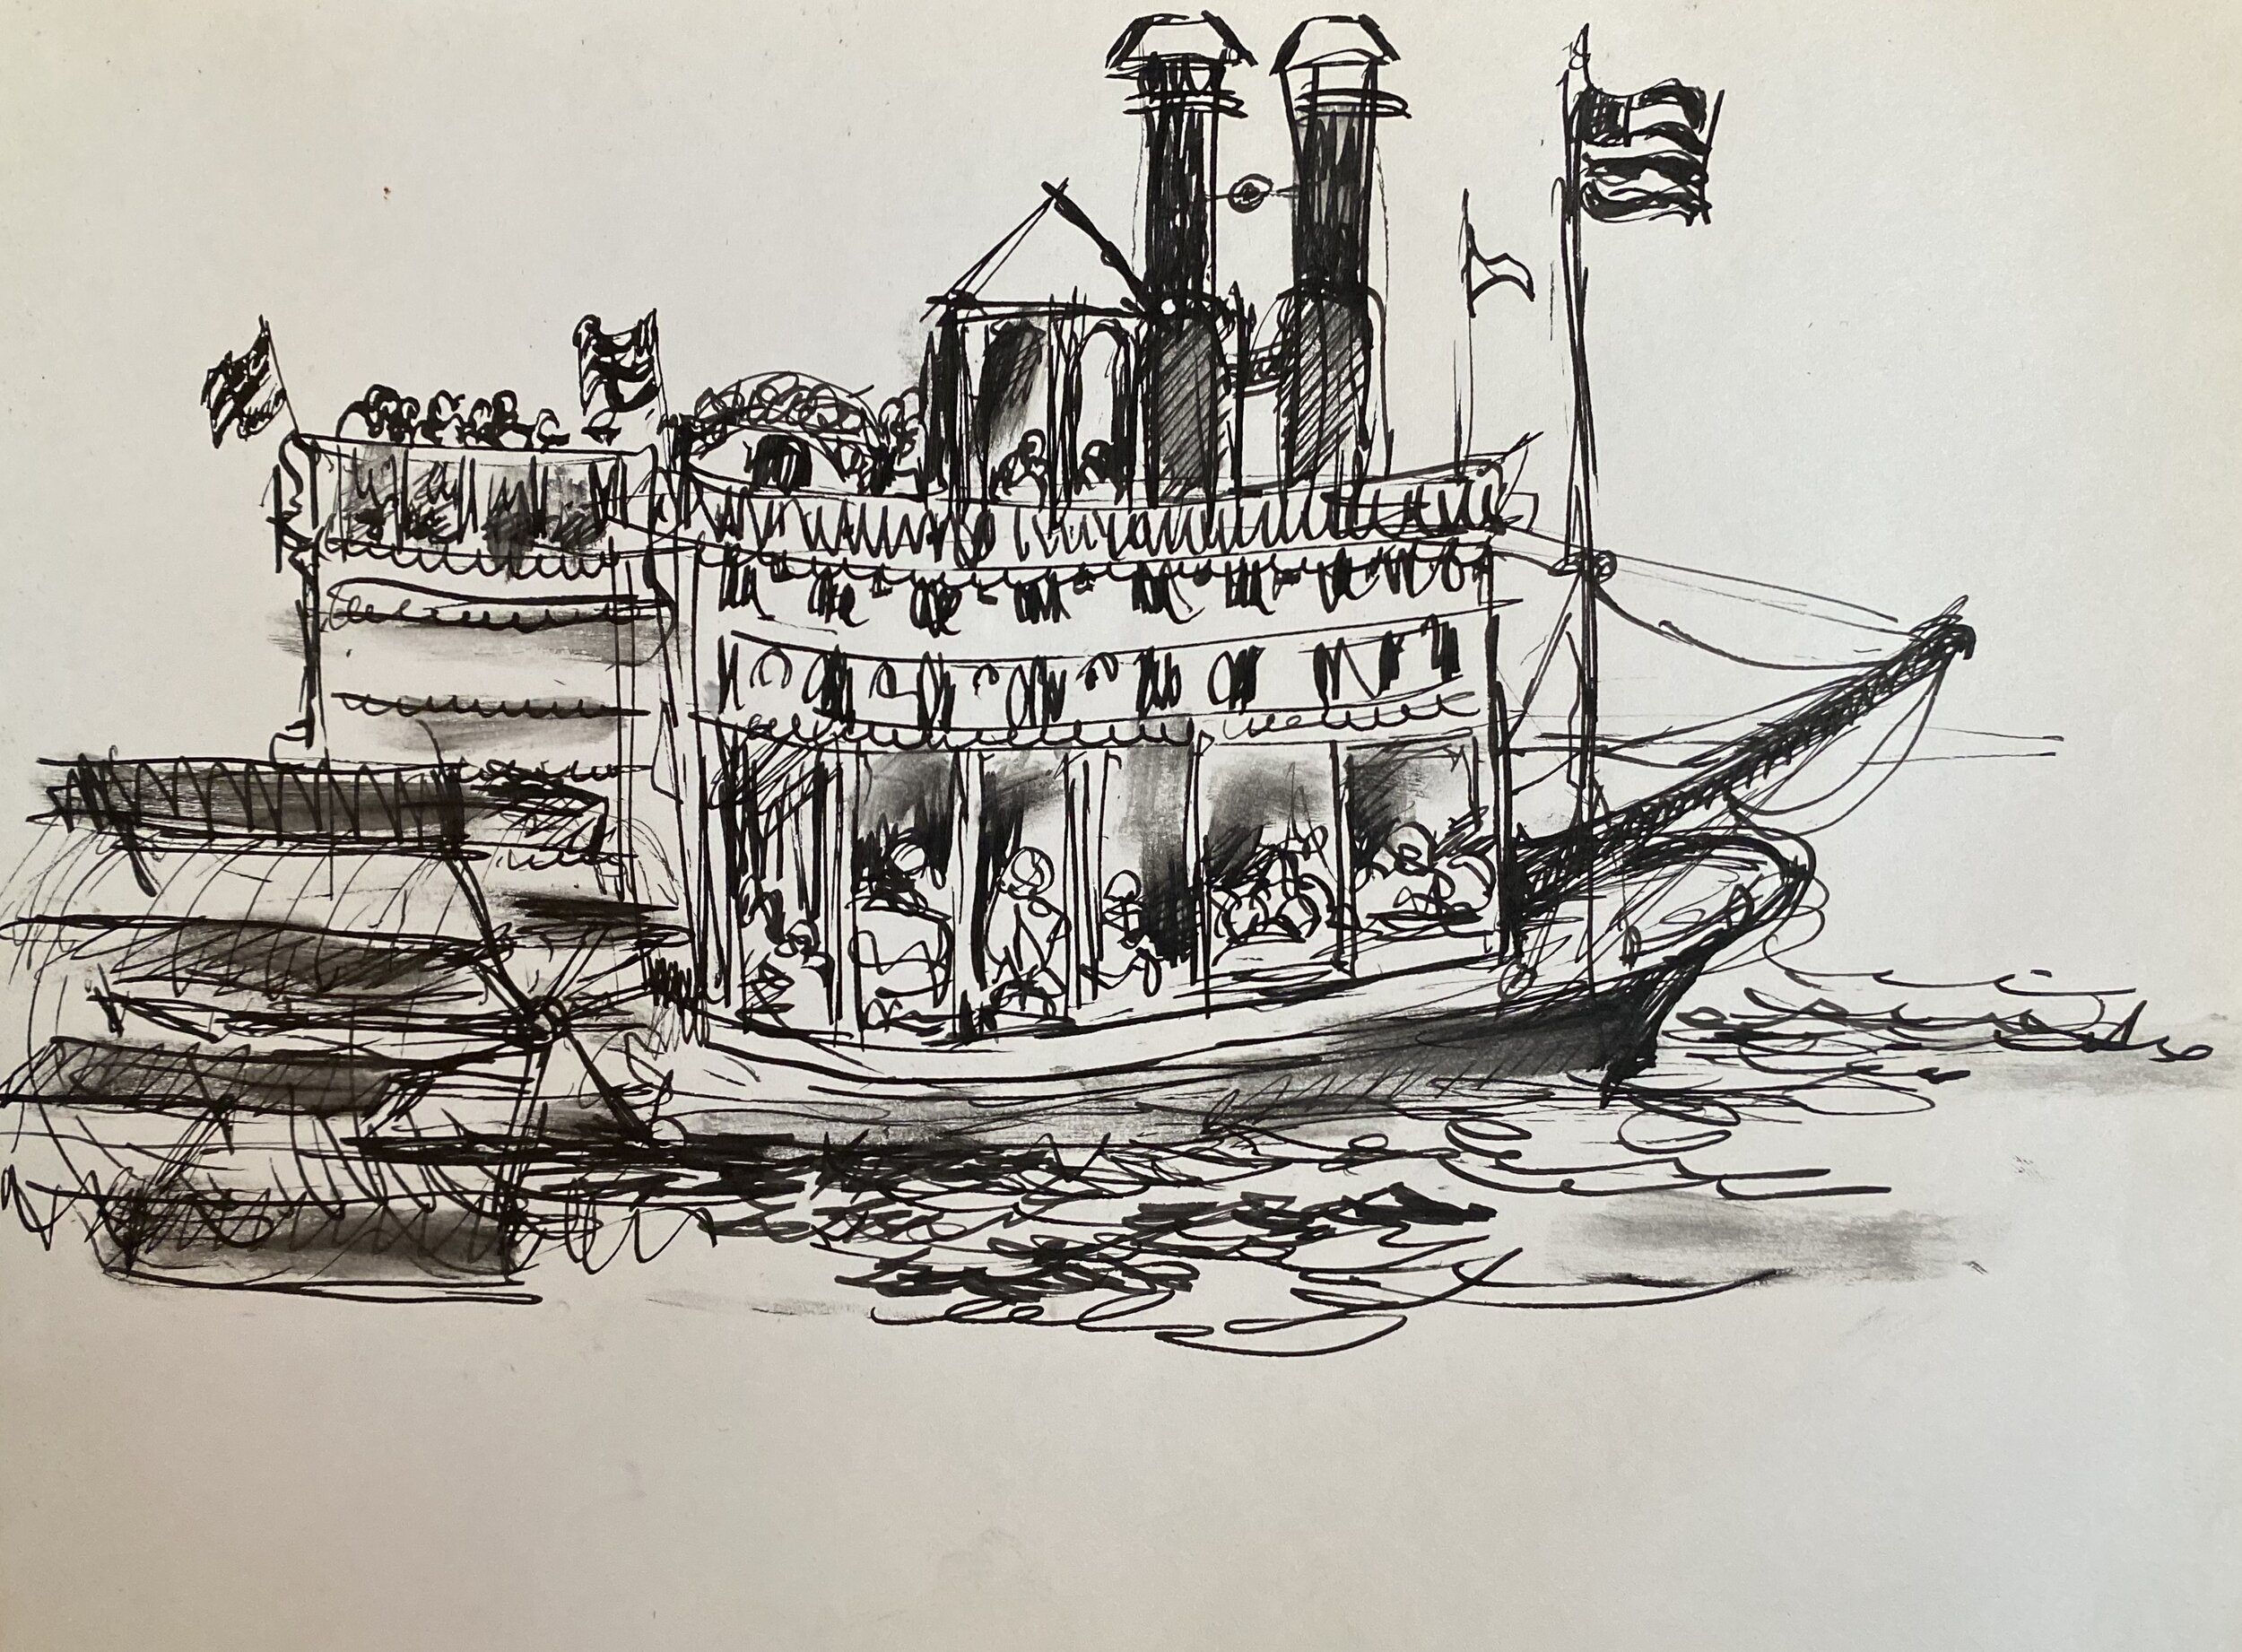   Description:  Steamboat   Medium:  Ink on paper   Dimensions:   H: 8 in W: 10.5 in 